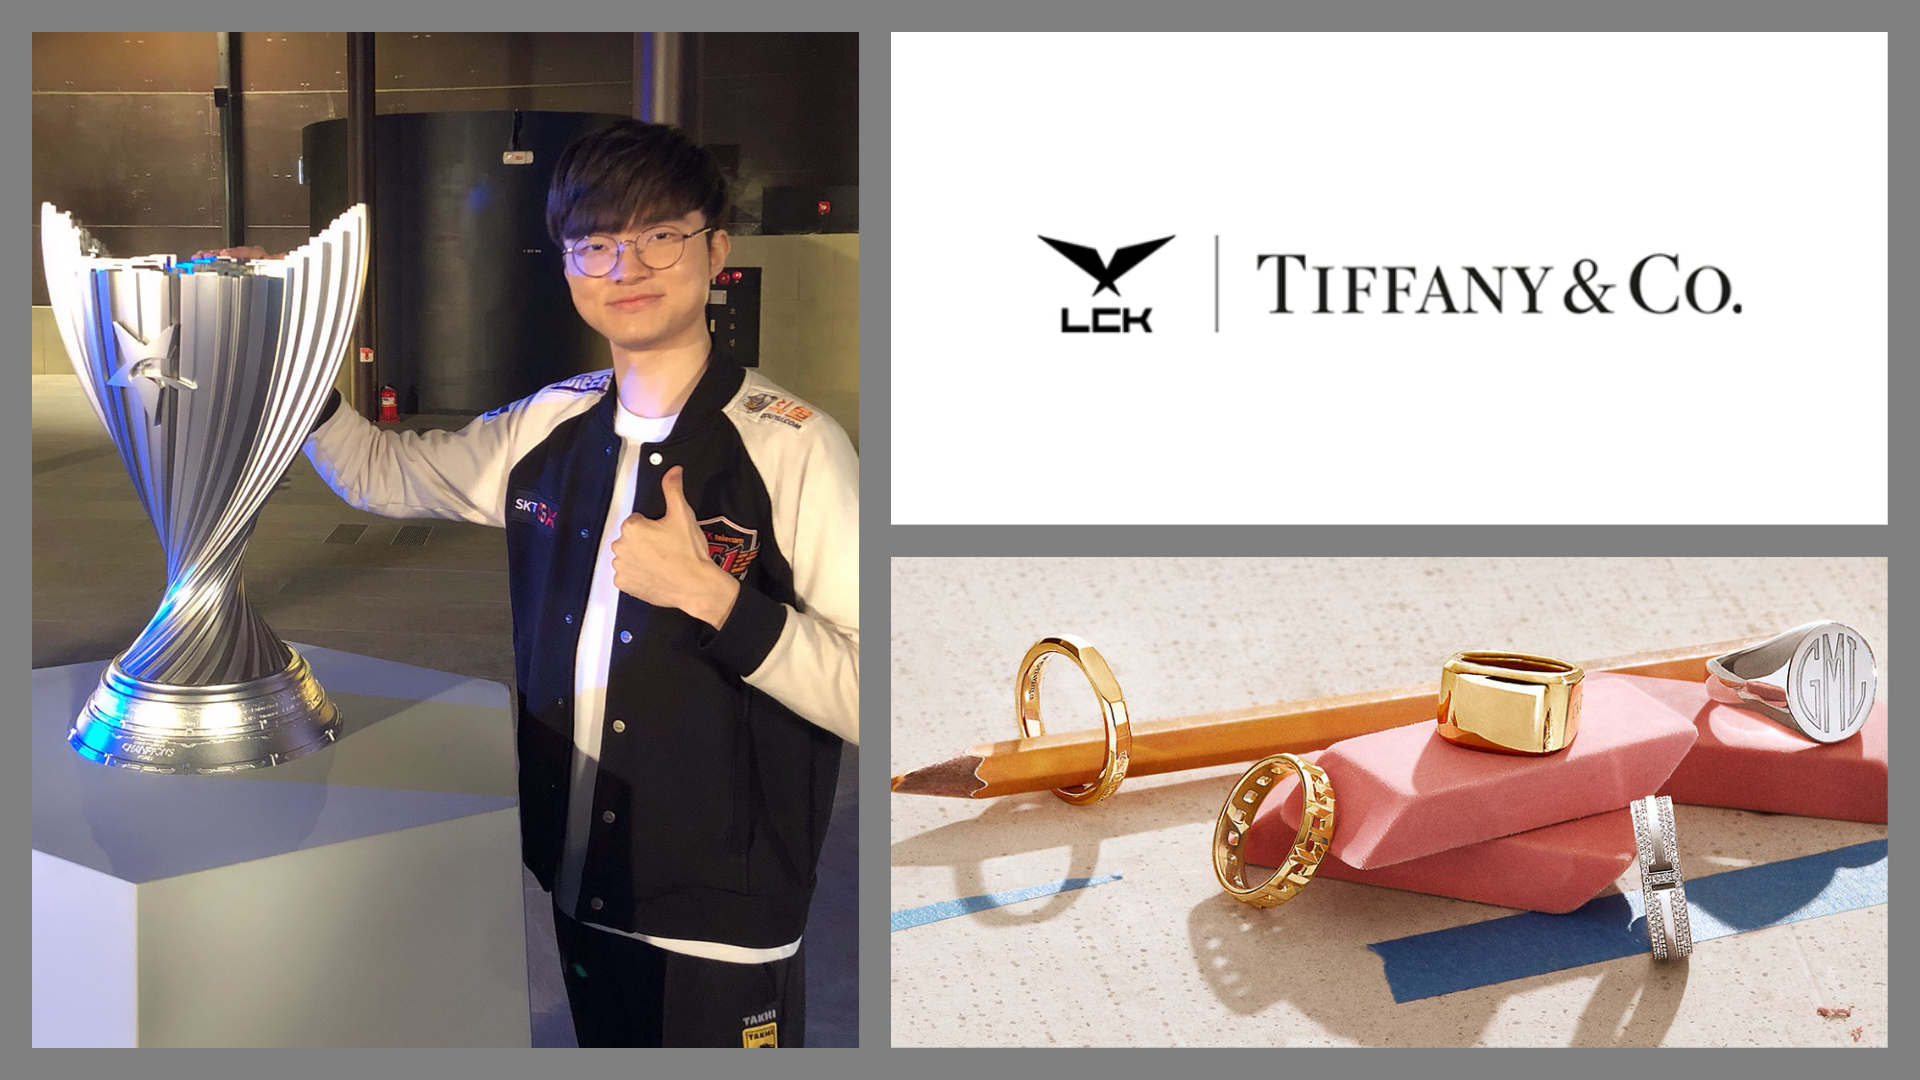 Take a look at Tiffany and Co.'s gorgeous 2021 LCK Summer Finals rings